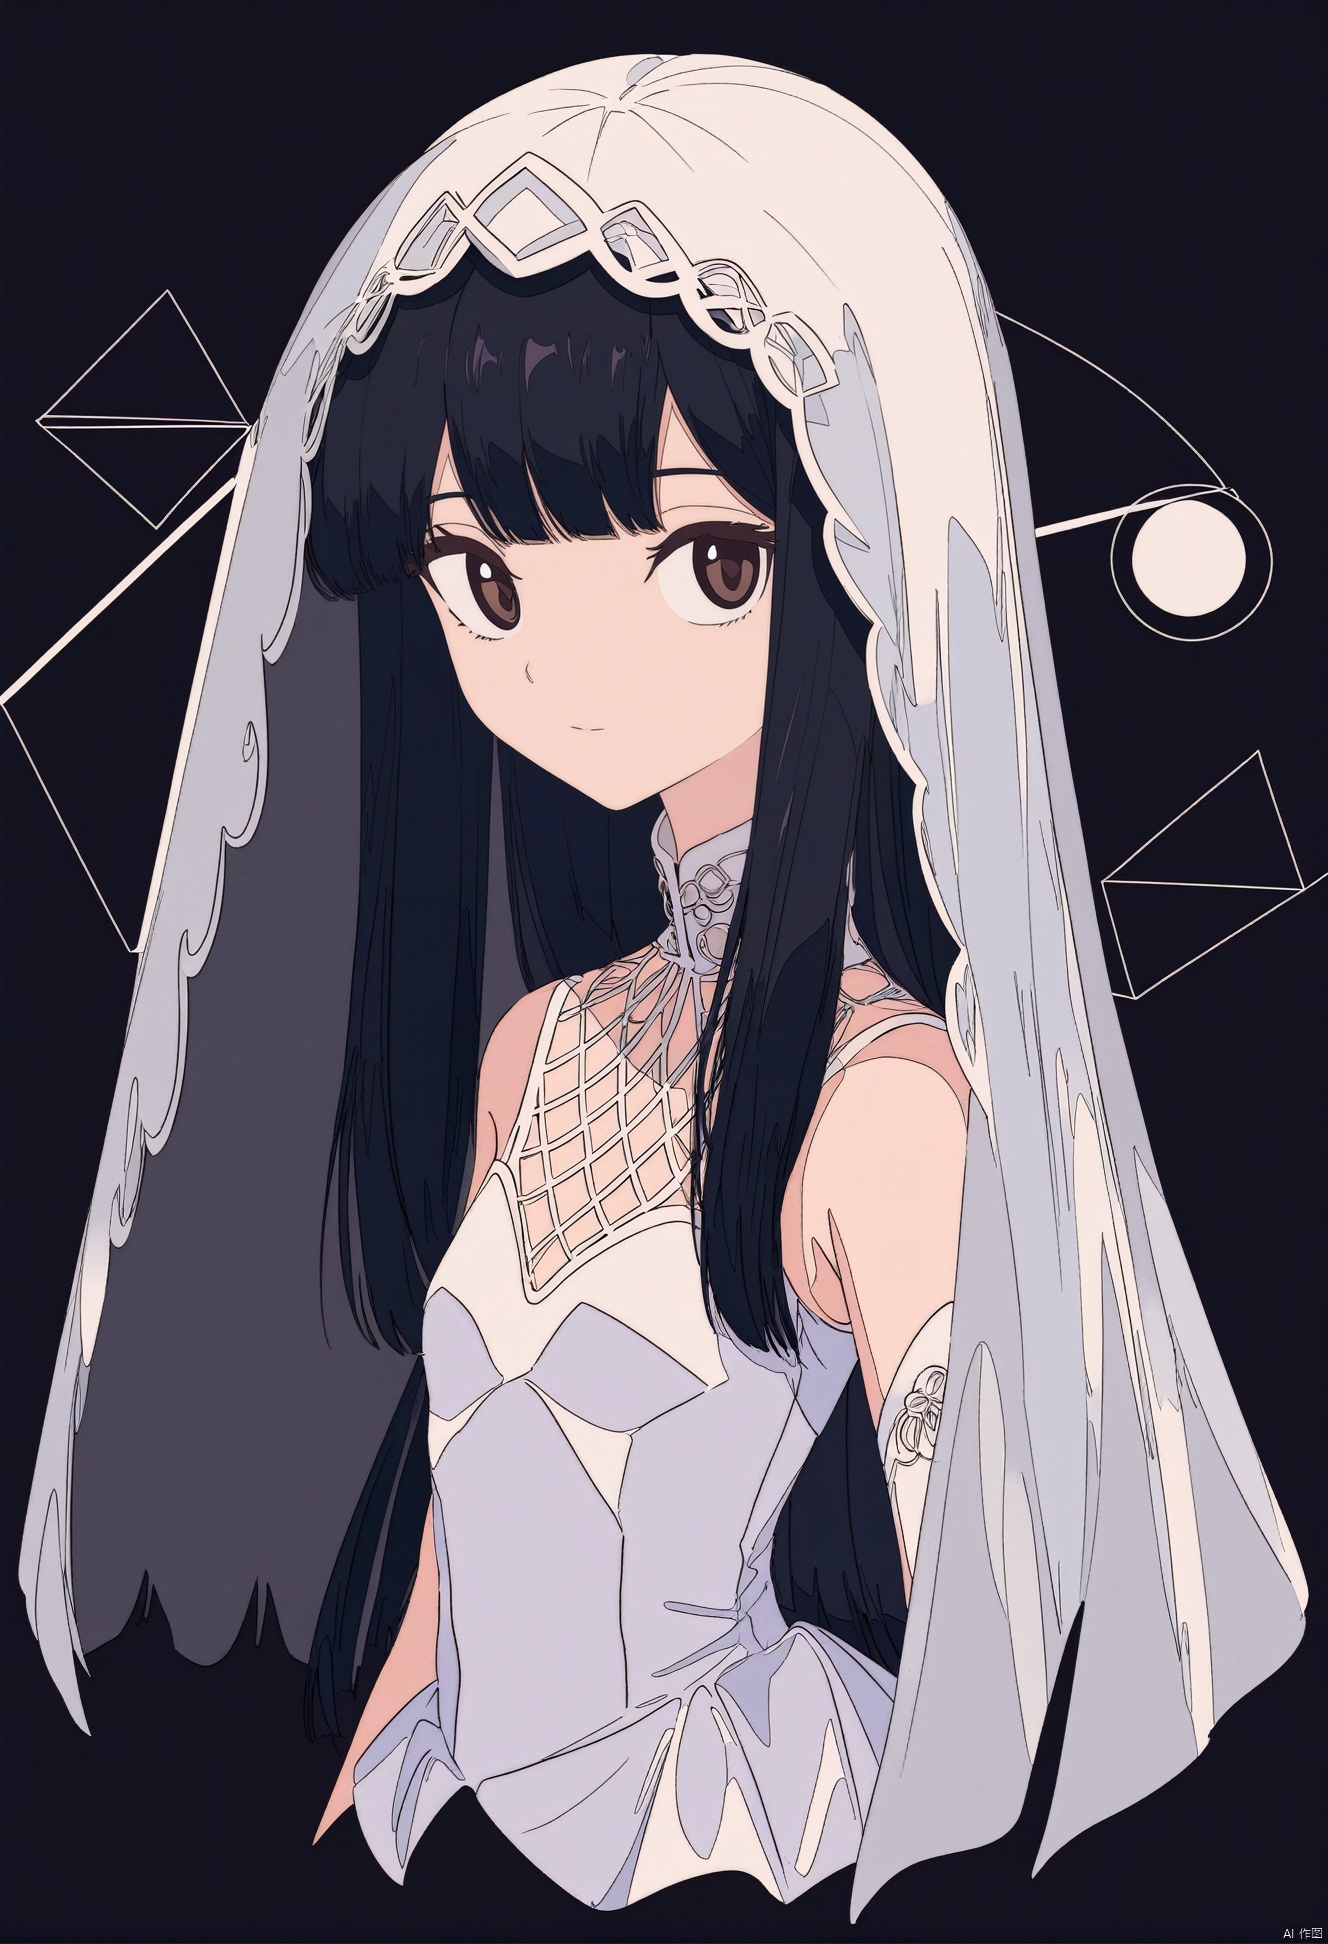 a gongbi painting of a 20 years old black long hair Chinese girl, Cute and beautiful girl, wearing a white wedding dress and a white veil on her head, pink and tender, half body, looking at the camera, extremely minimalism portrait, geometric shapes, matte light black background, in the style of crisp neo-pop illustrations, animated gifs, dolly kei, cartoon-like characters